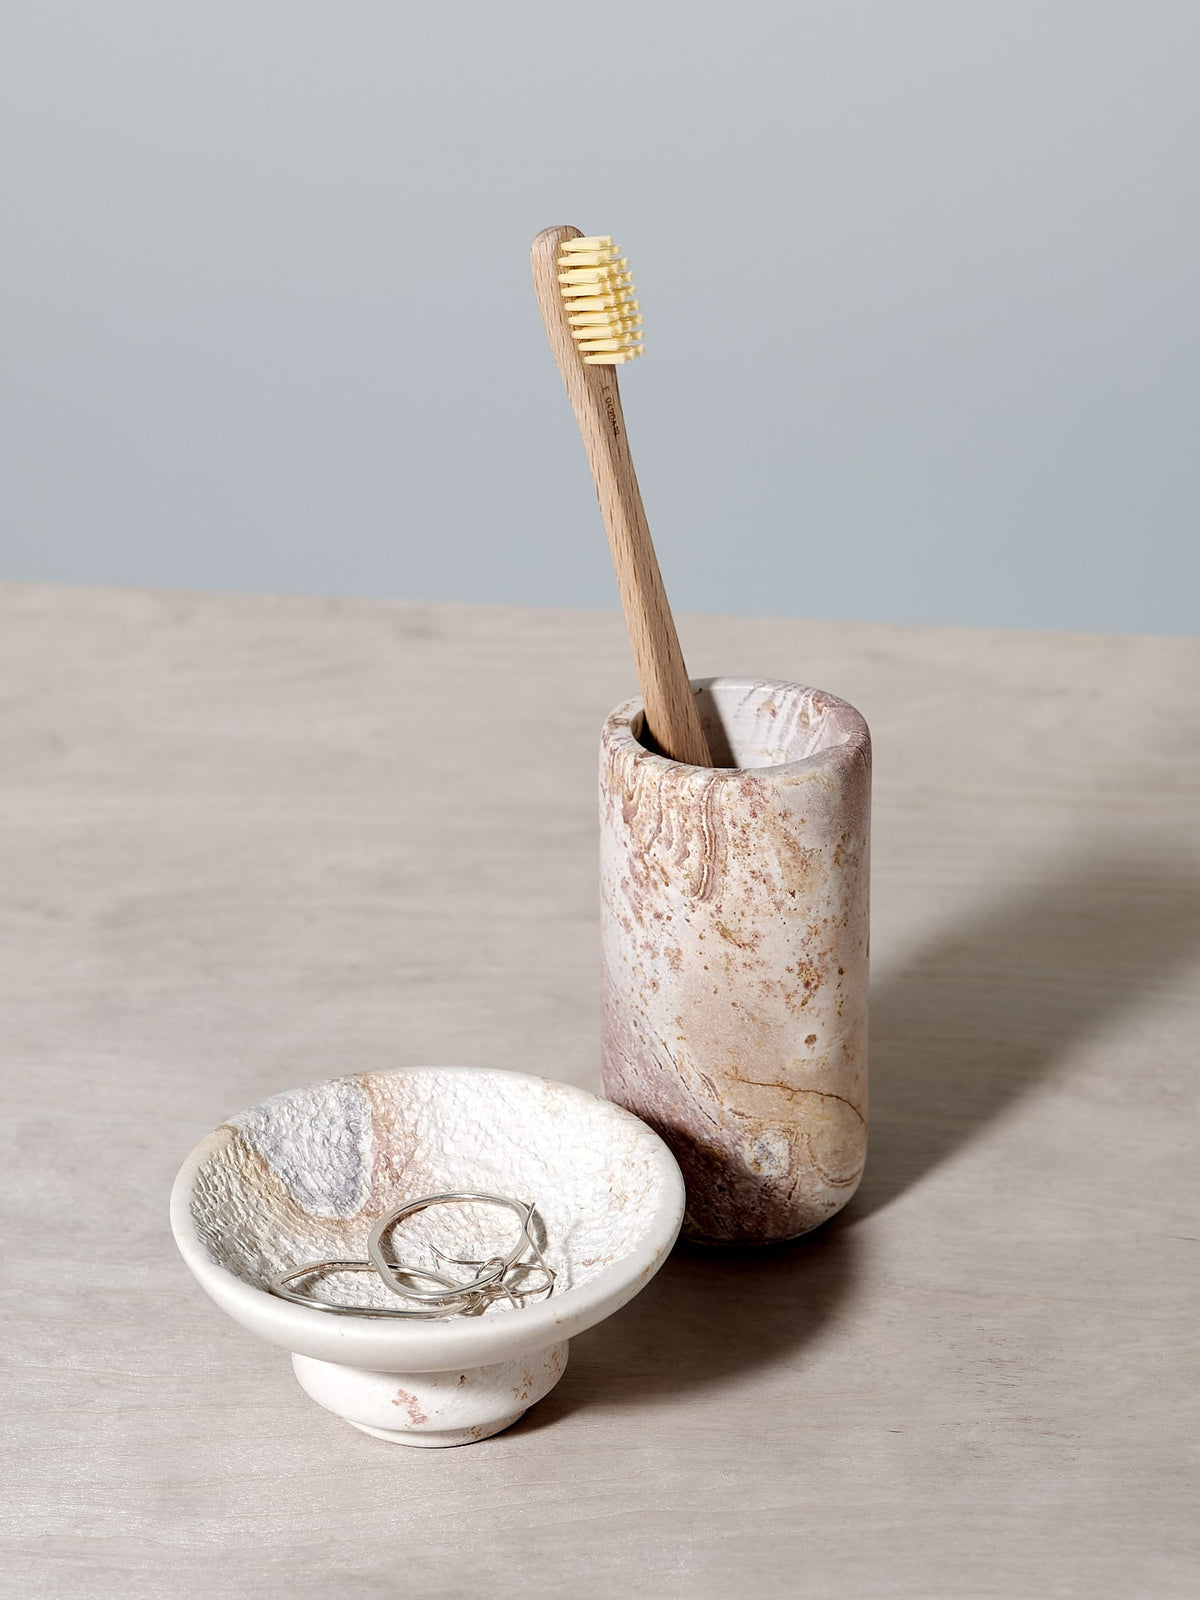 An Amina Bowl Set Small – Pink and toothbrush holder on a table.